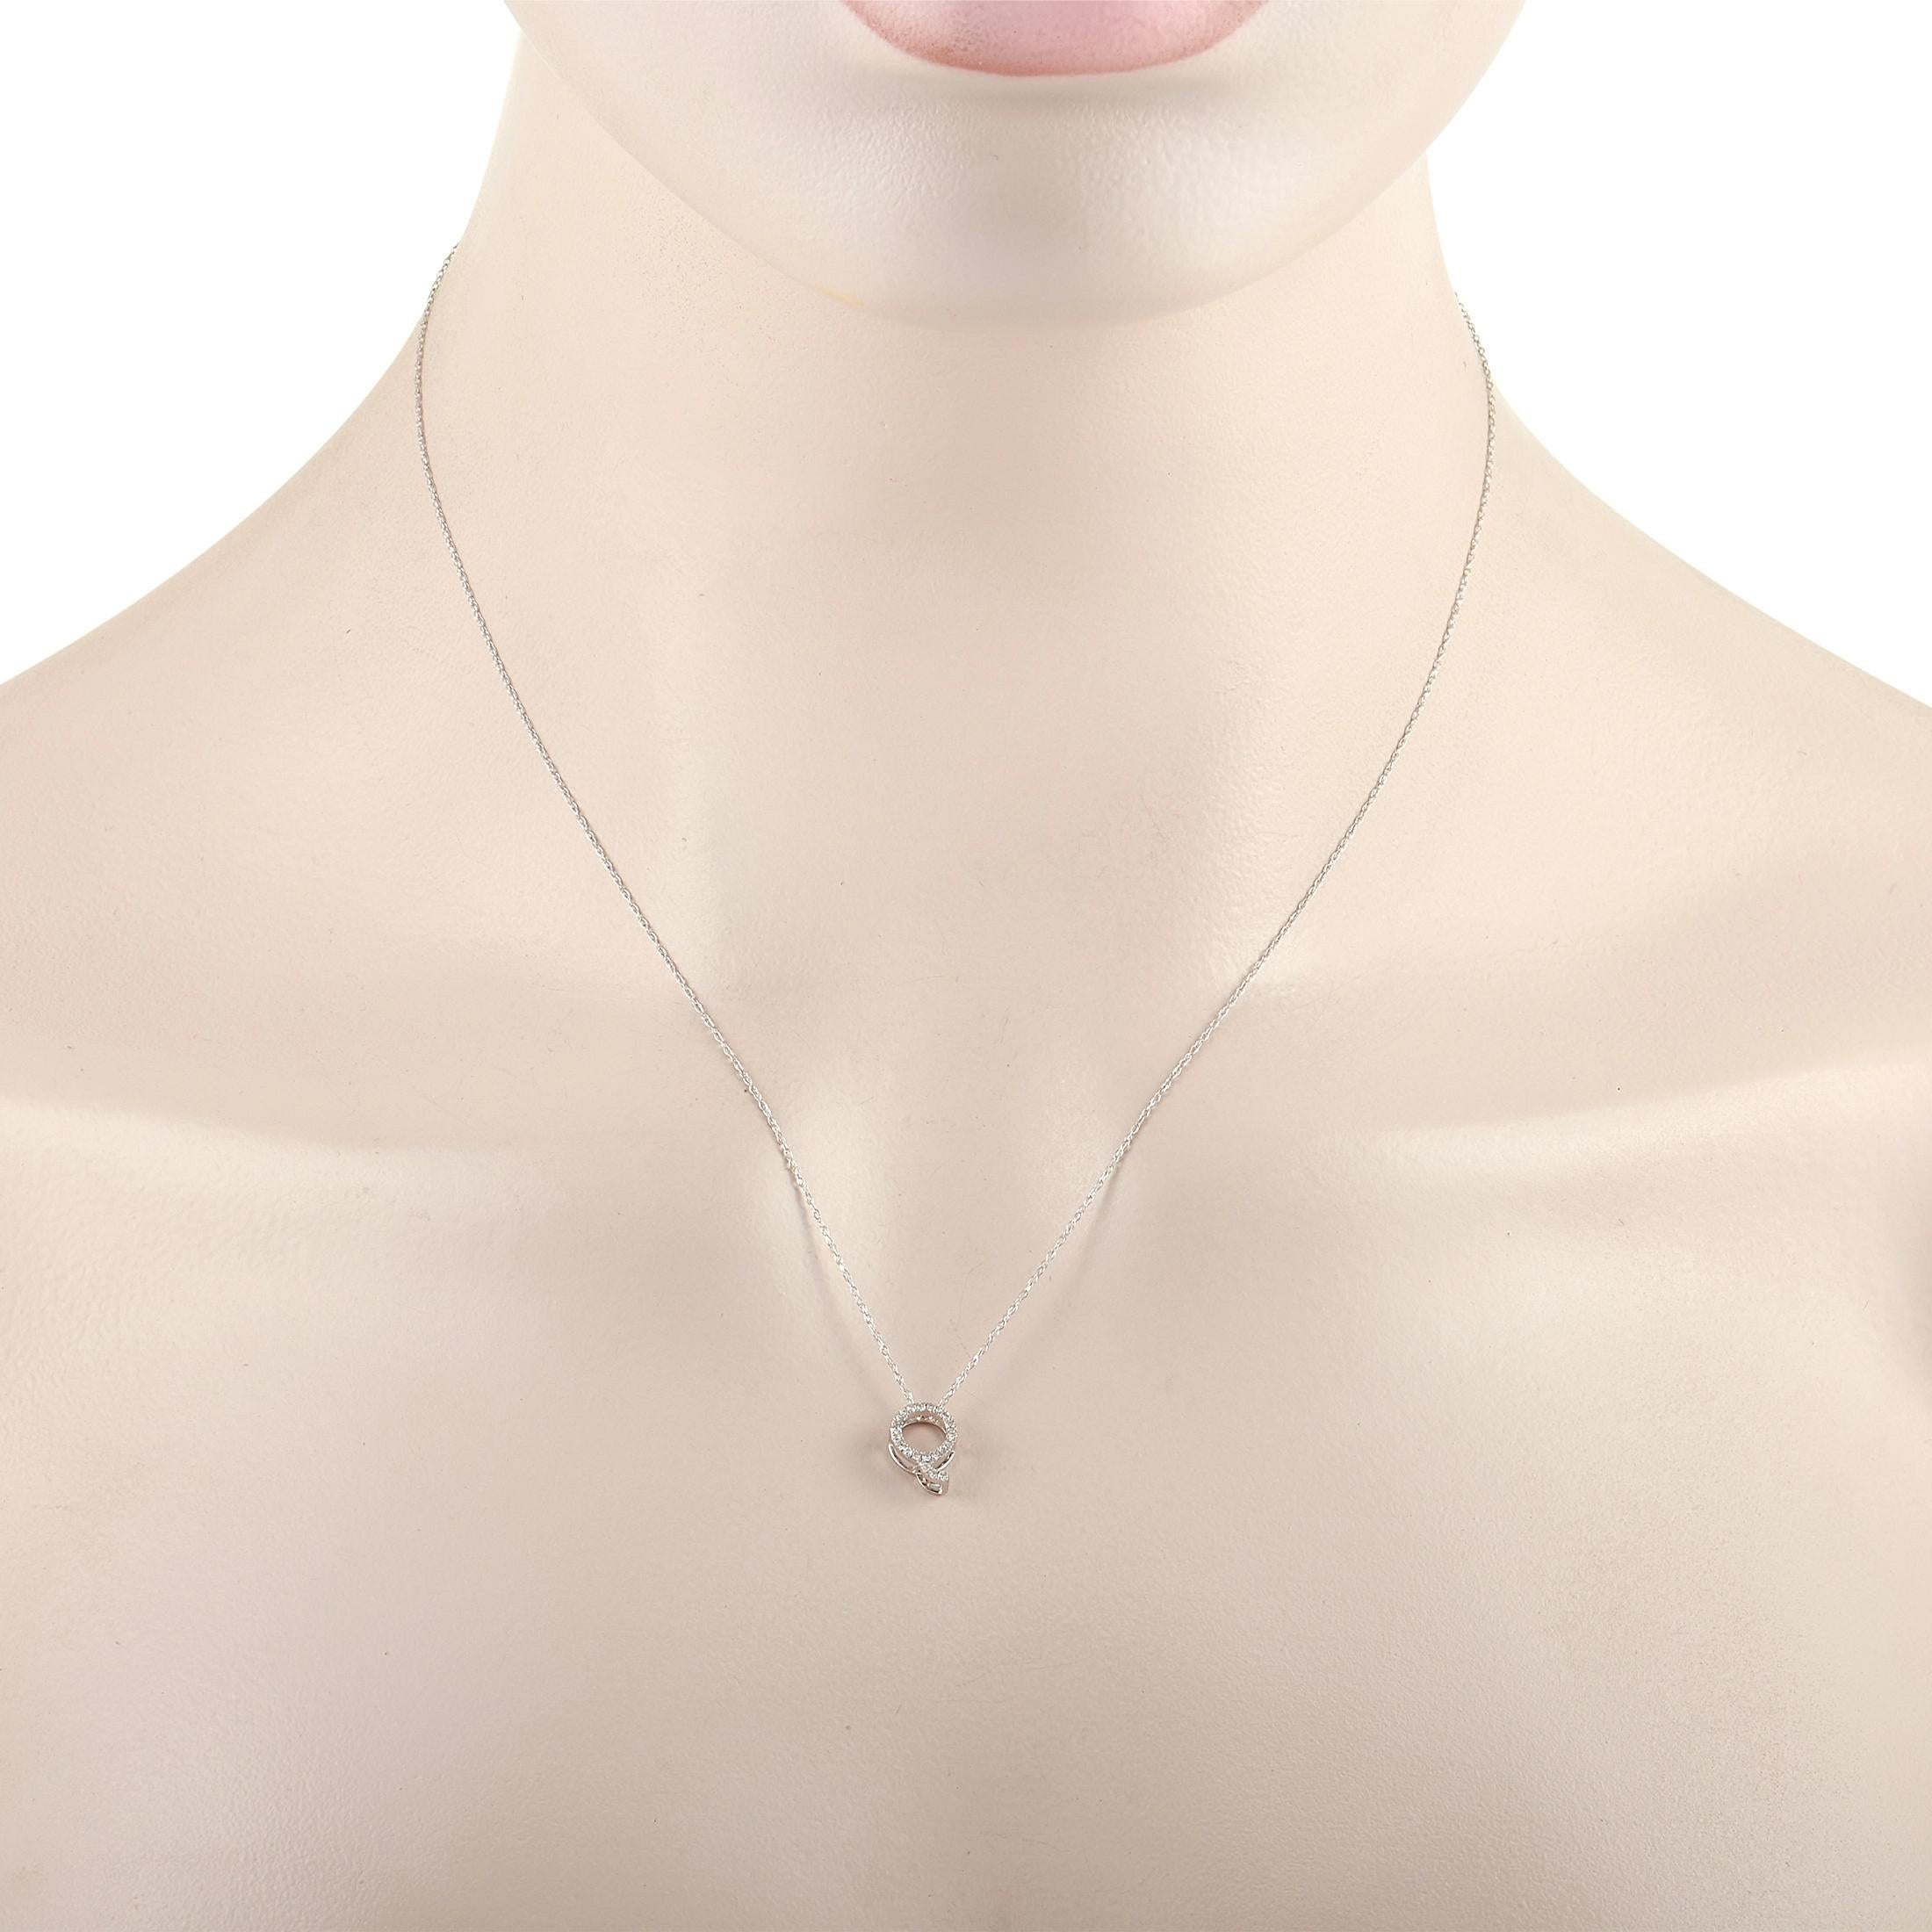 This pretty LB Exclusive 14K White Gold 0.10 ct Diamond Initial ‘Q’ Necklace is made with a delicate 14K white gold chain and features a small white gold pendant shaped like the letter ‘Q’ and set with 0.10 carats of round diamonds throughout. The